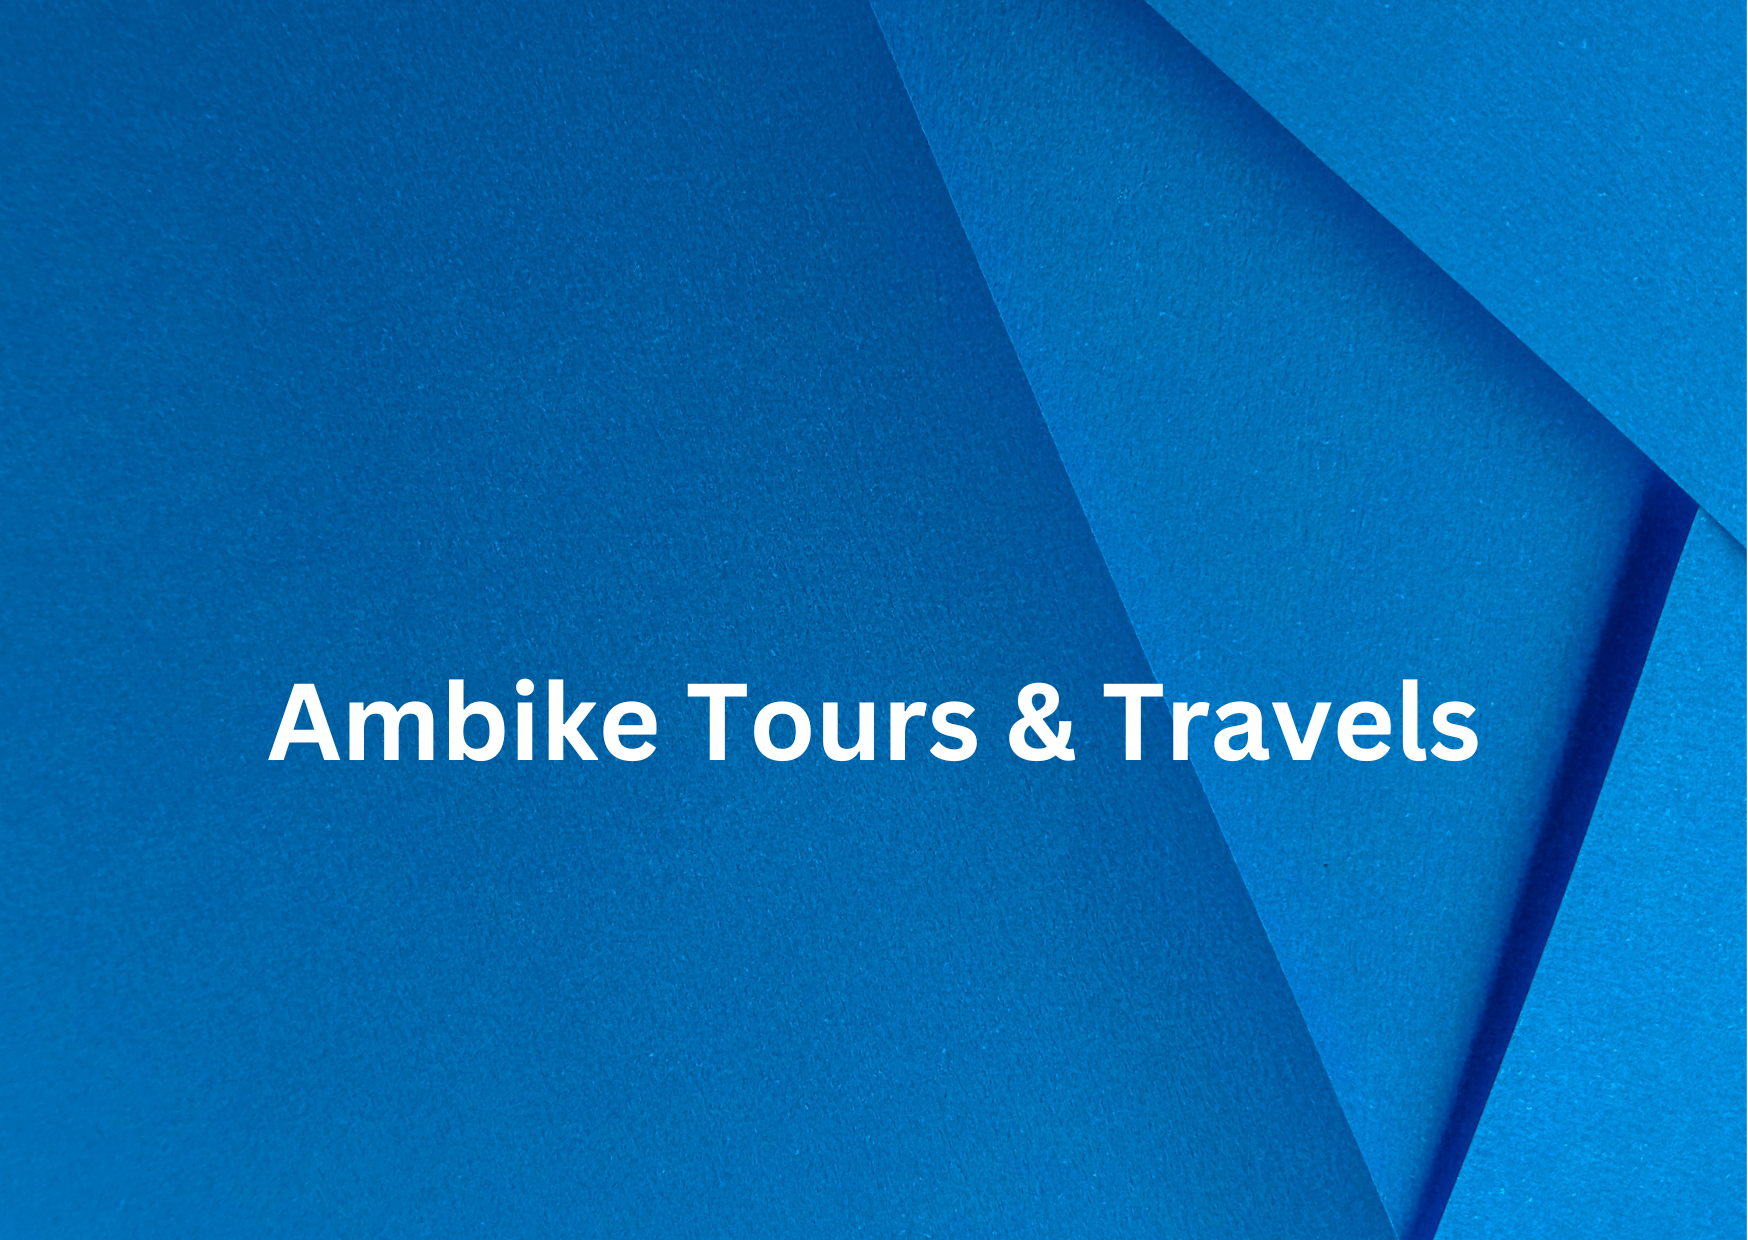 Ambike Tours & Travels,   